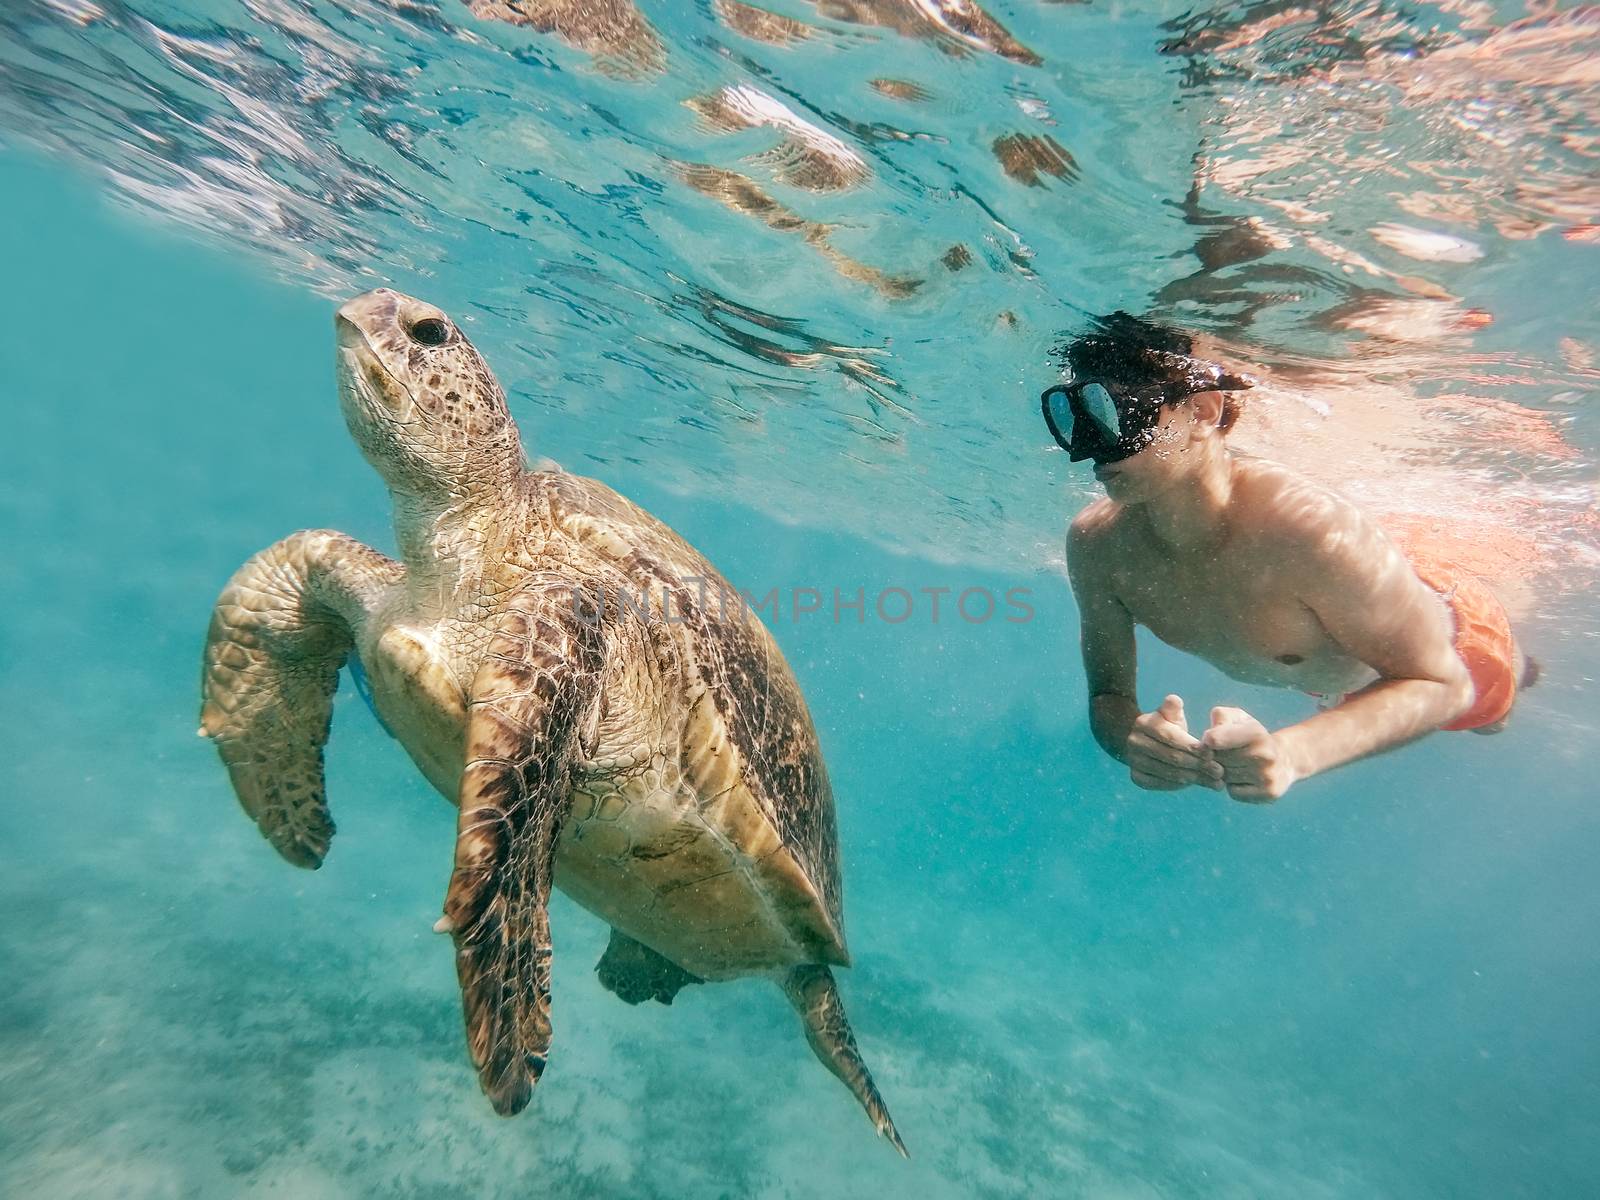 Young boy Snorkel swim with green sea turtle, Egypt by artush